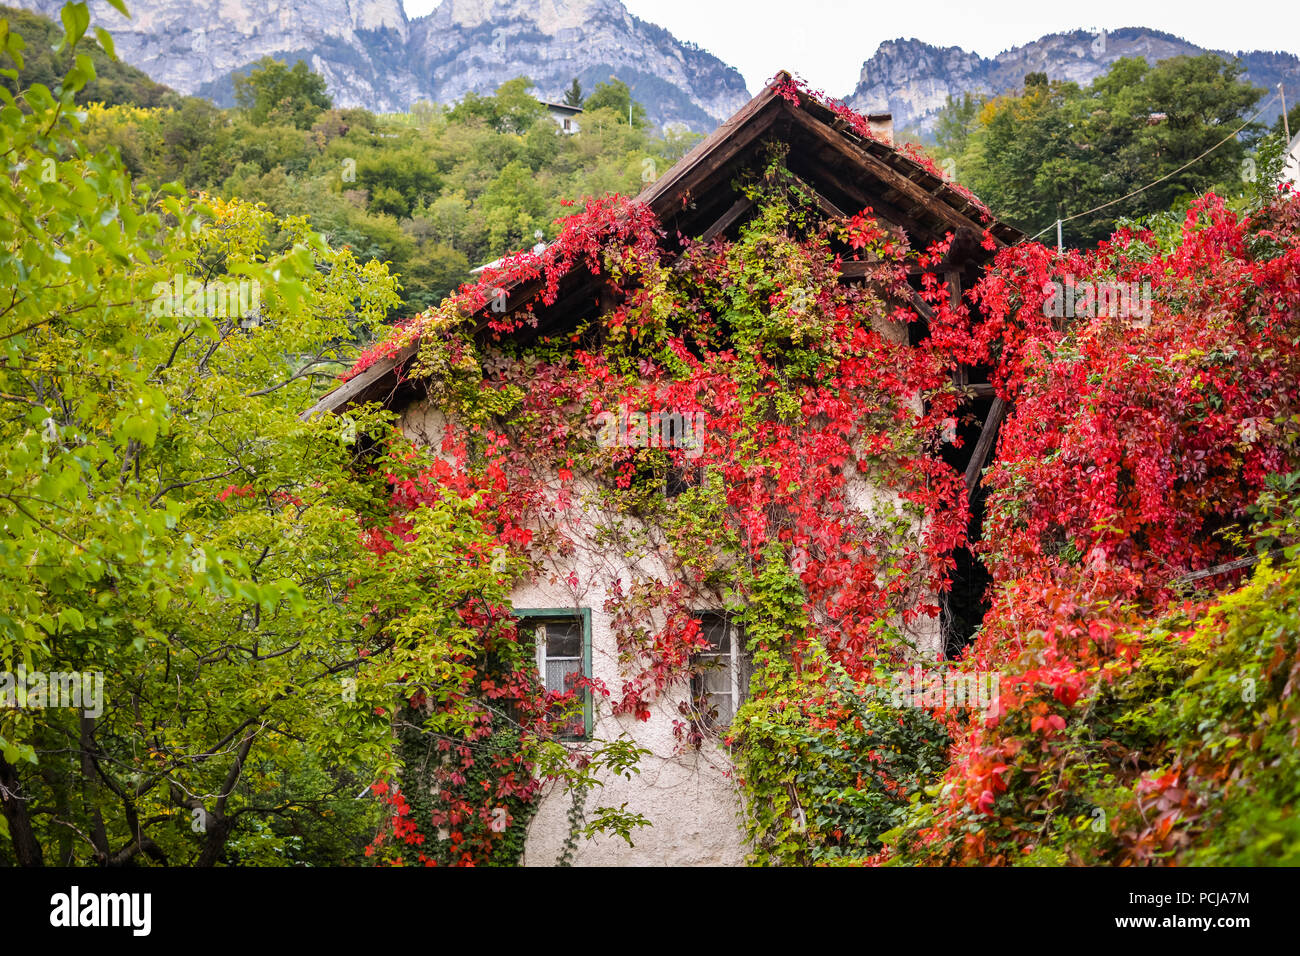 Virginia Creeper in autumn, Parthenocissus quinquefolia, covering old house in South Tyrol, Italy Stock Photo